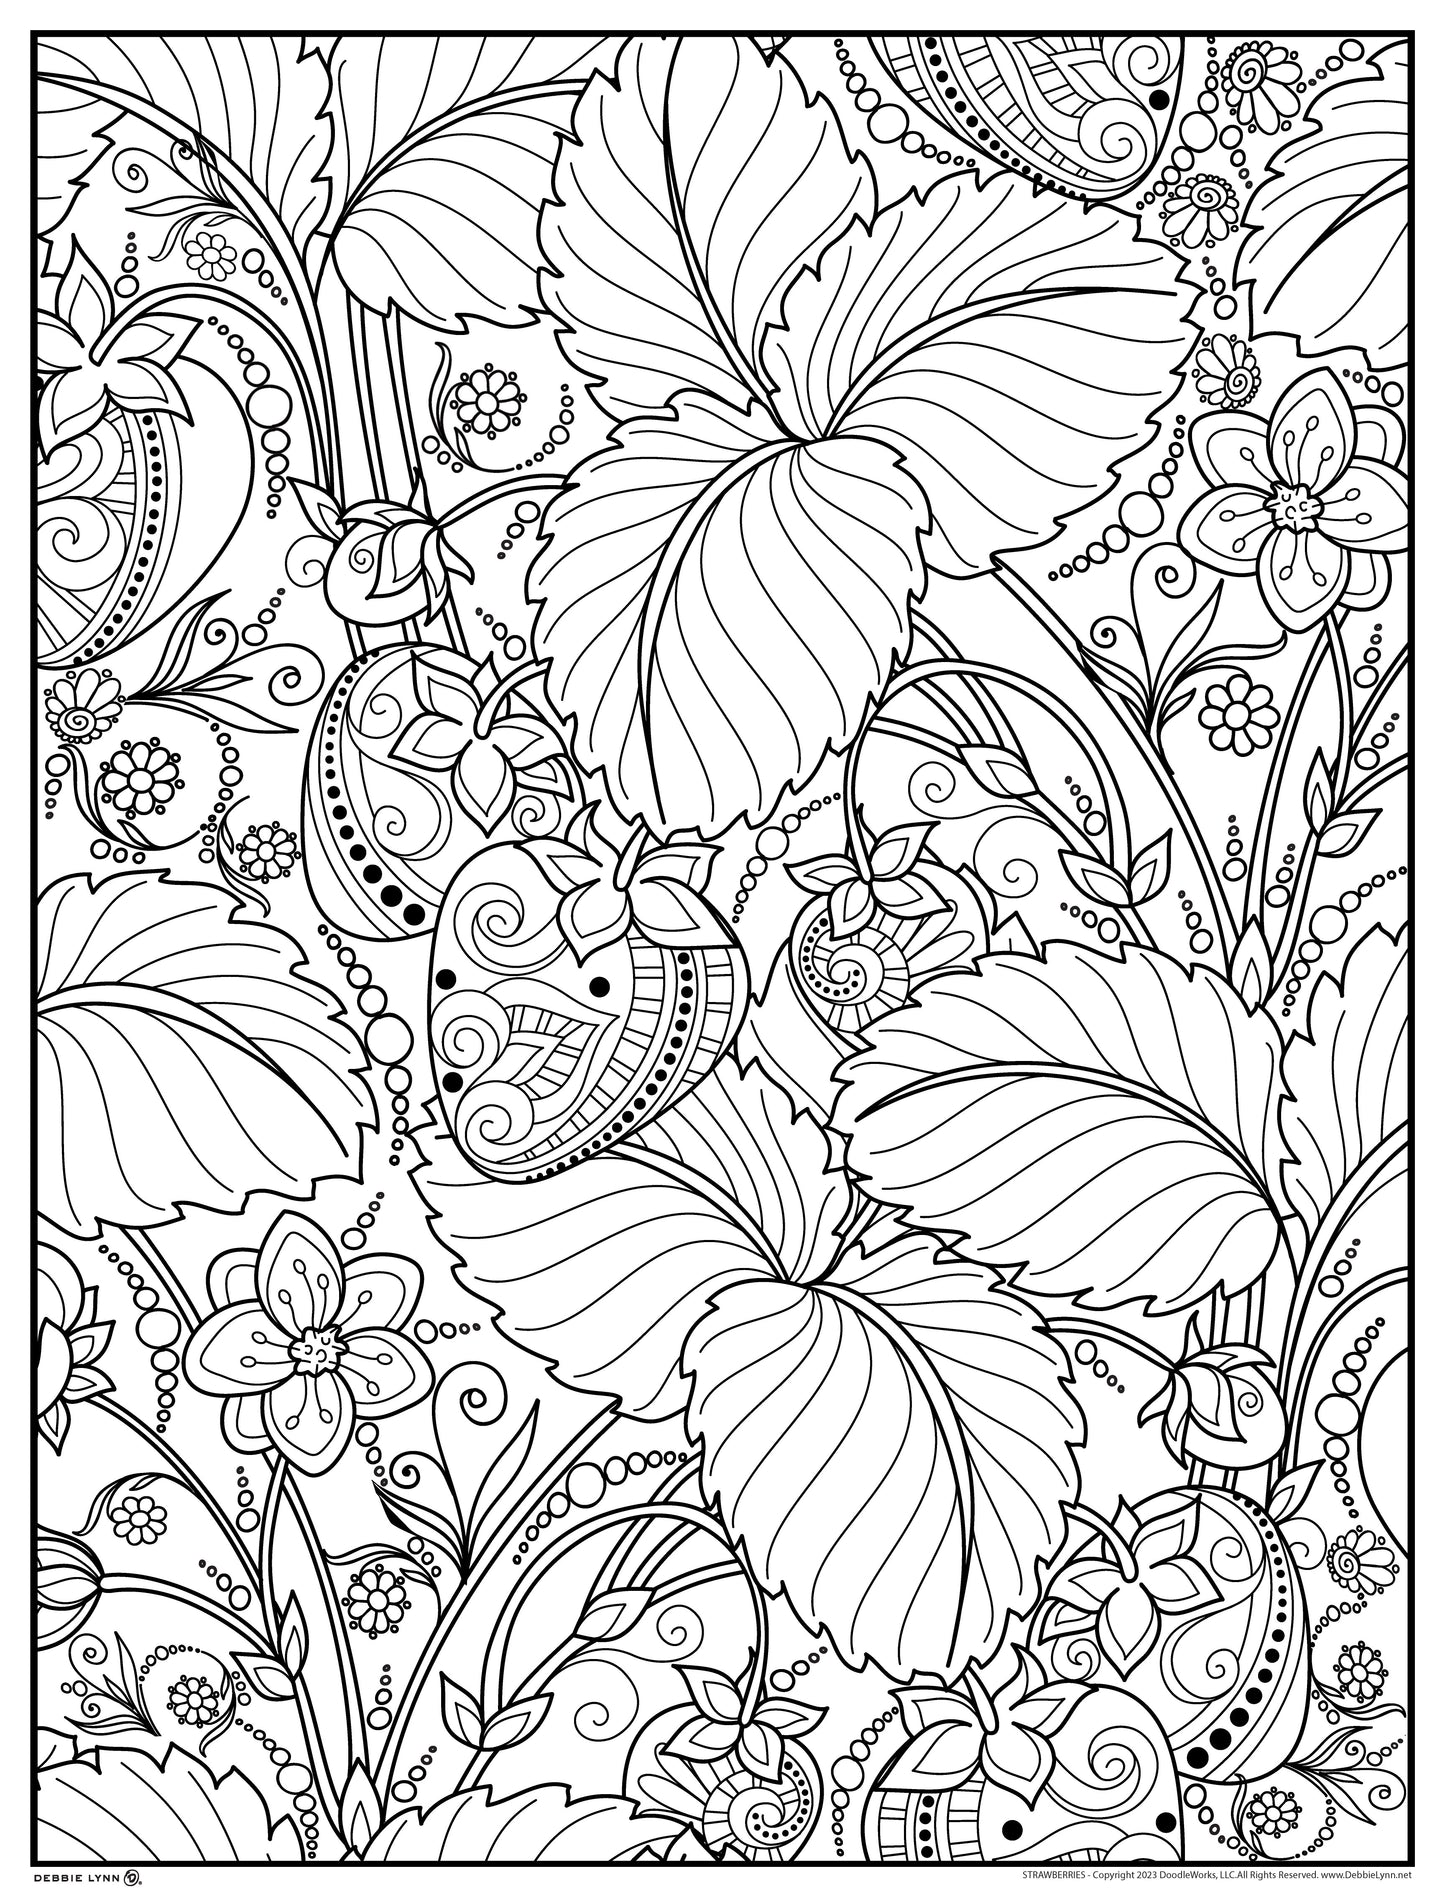 Strawberries Personalized Giant Coloring Poster 46"x60"